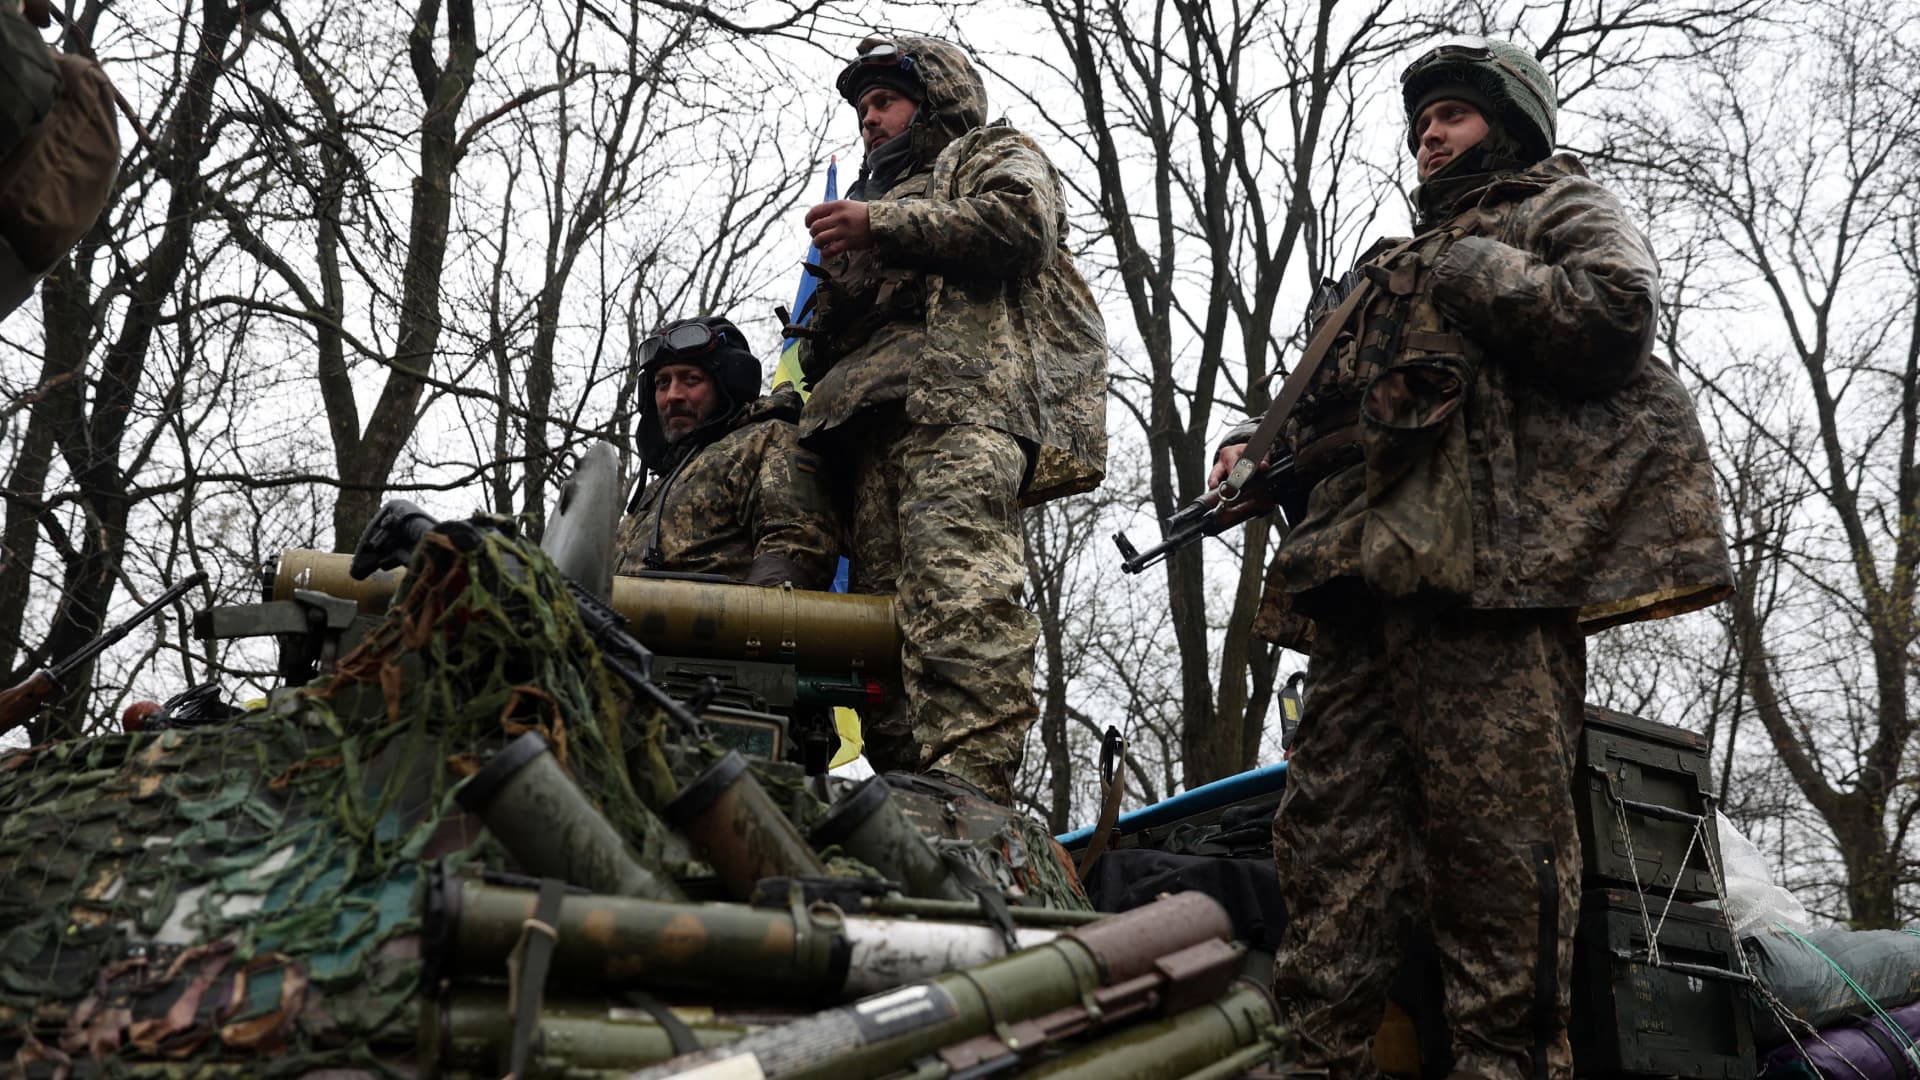 Ukrainian soldiers stand on their armored personnel carrier, not far from the front-line with Russian troops, in the Kharkiv region on April 18, 2022. Russia-aligned actors began pre-positioning for the invasion of Ukraine as early as March 2021, according to a Microsoft report released yesterday.